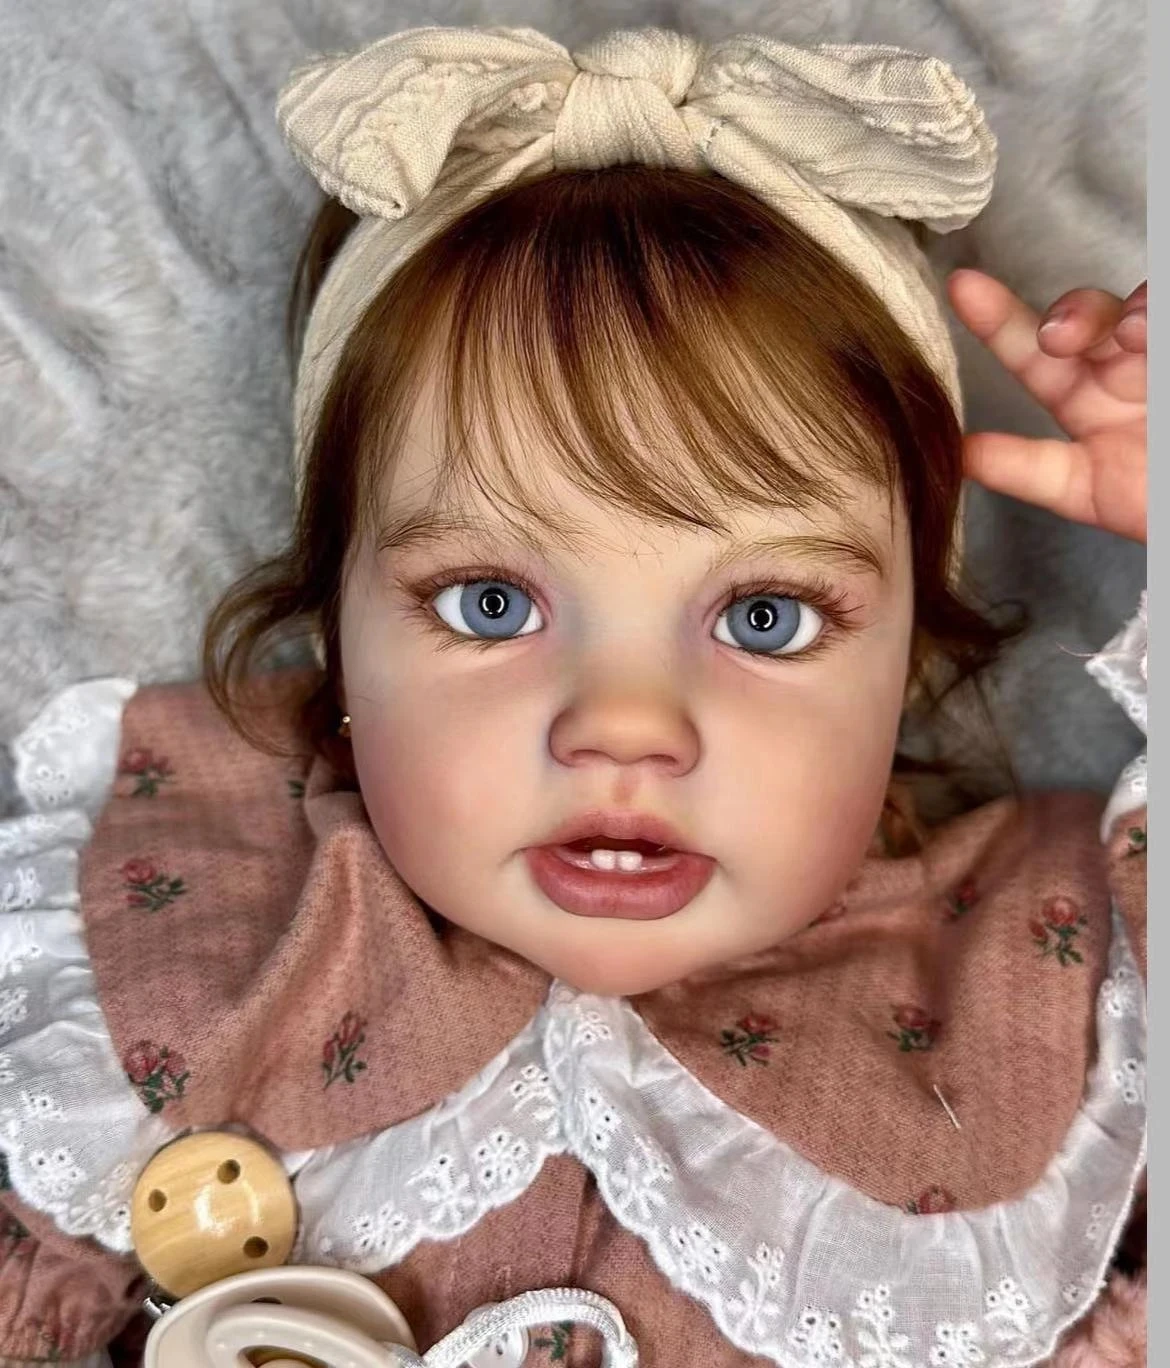 

NPK 24Inch Huge Baby Toddler Reborn Lottie Princess Girl Realistic Doll Unfinished Doll Parts included Cloth body and Eyes